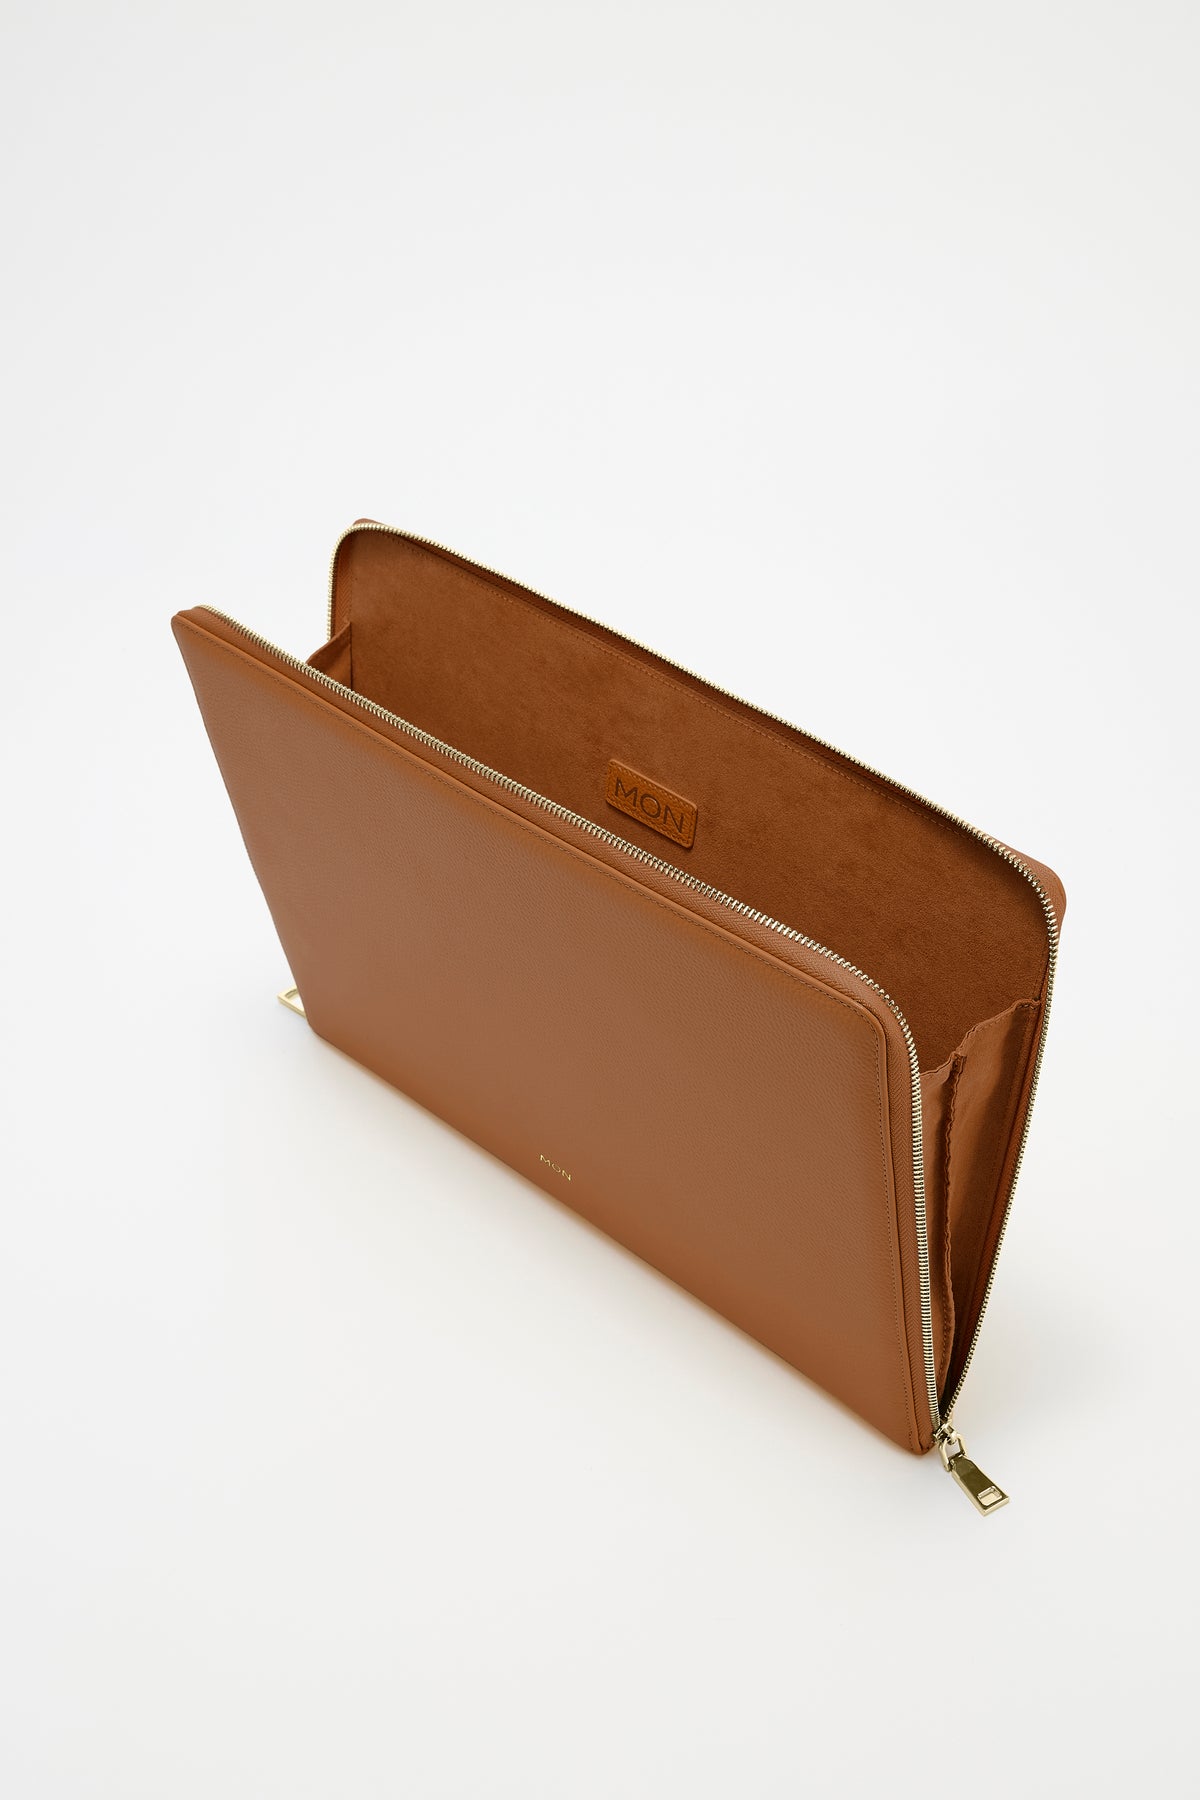 14" Padded Leather Laptop Case | Tan Gold